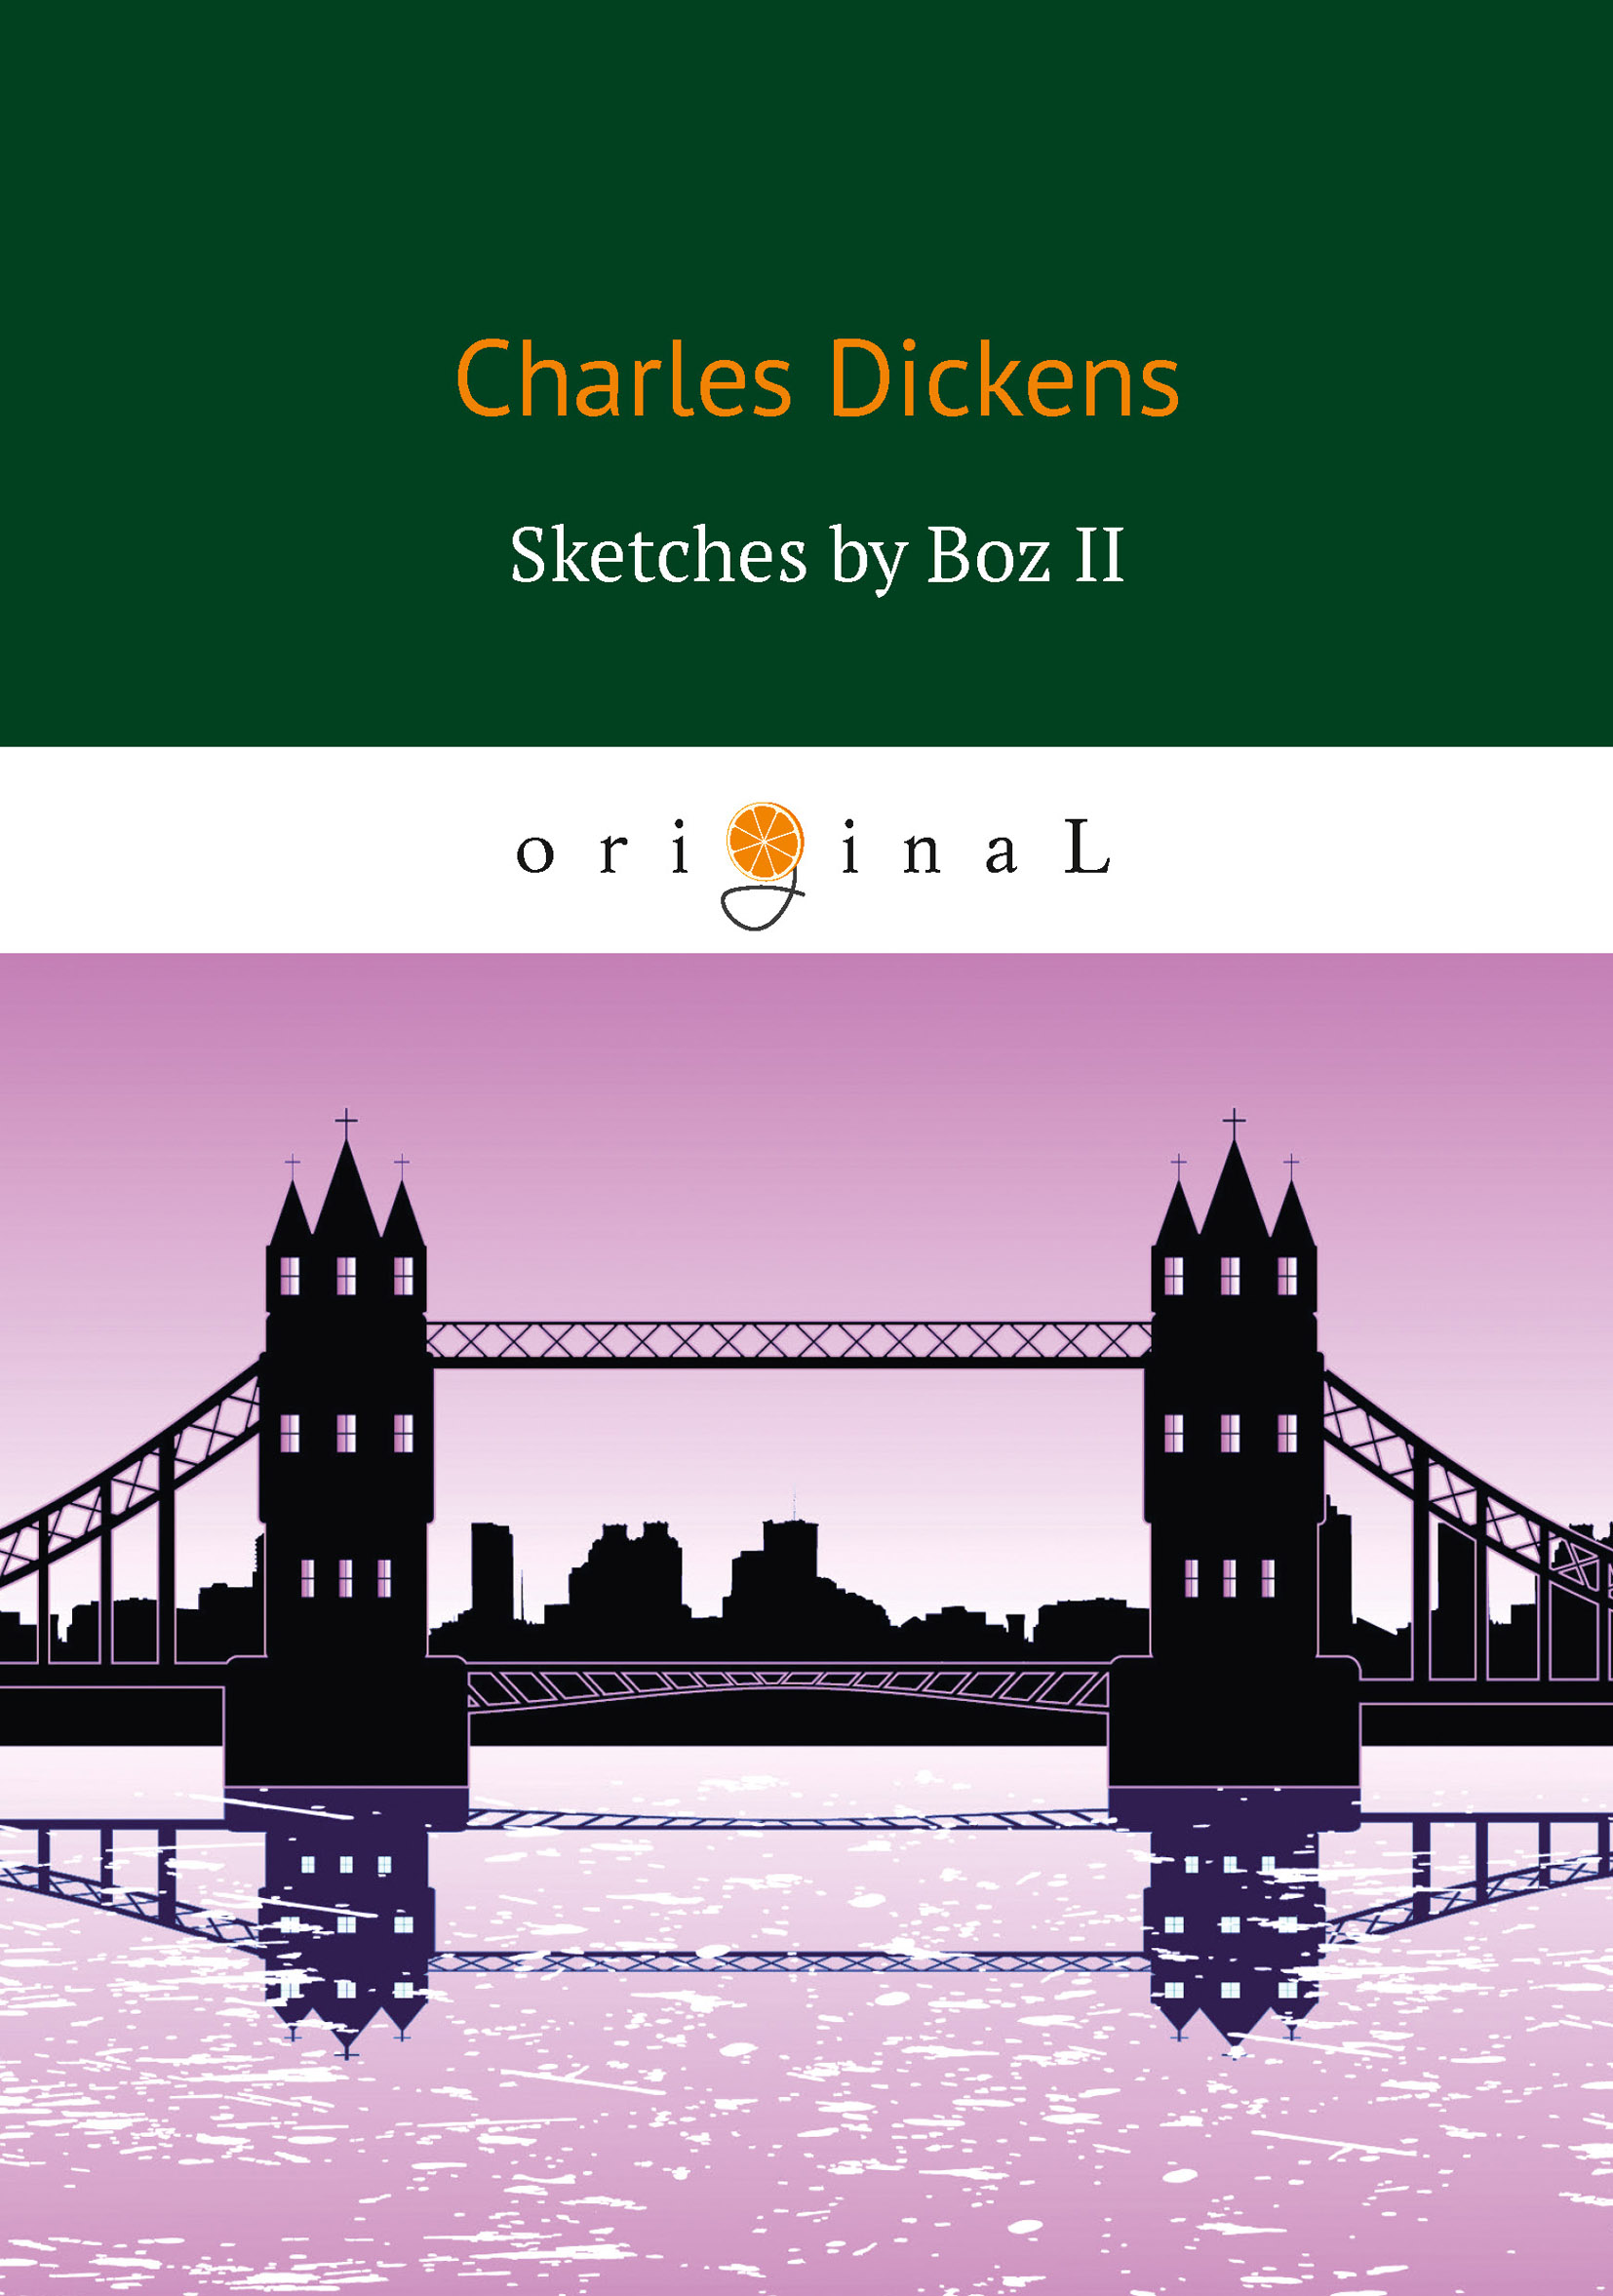 Sketches by Boz II. Dickens C.